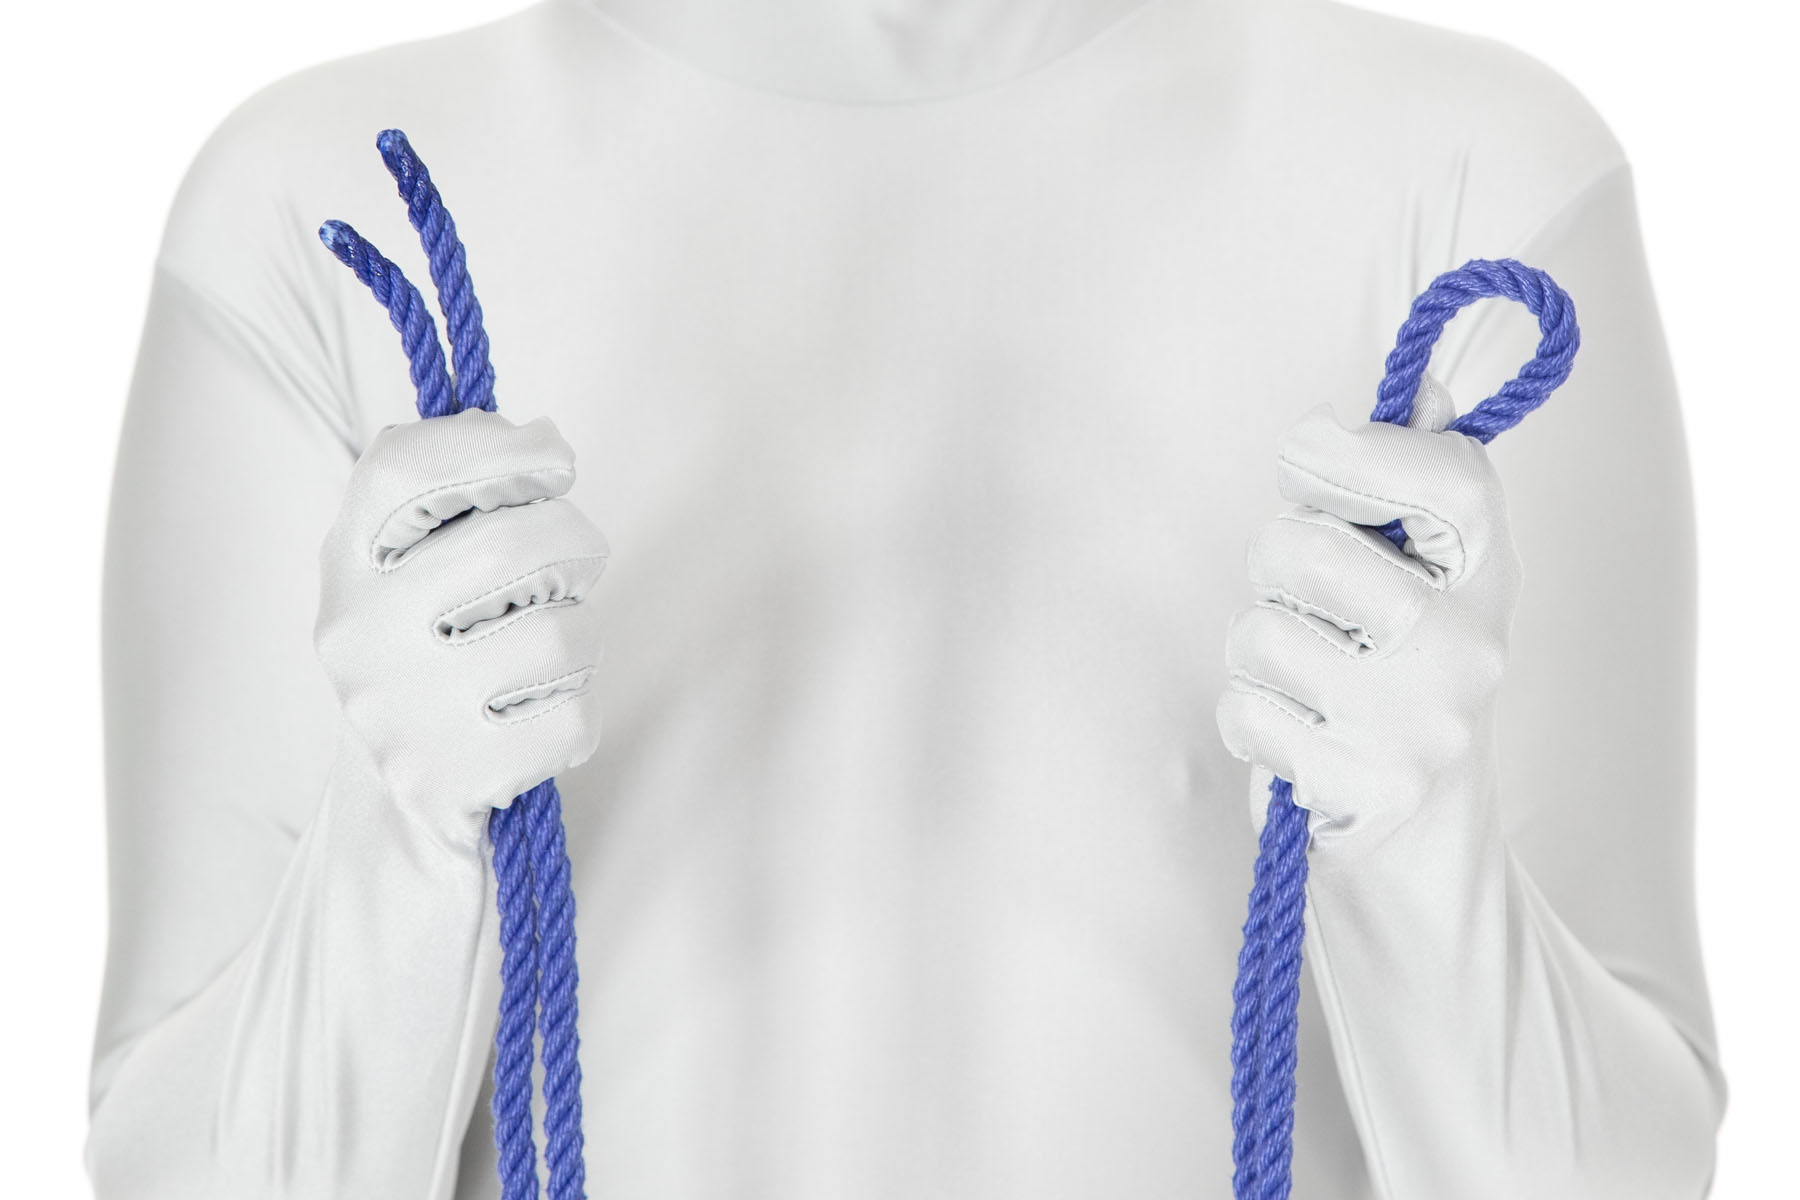 A person holding two ends of a blue rope in their right hand and the doubled center of the rope in their left hand.